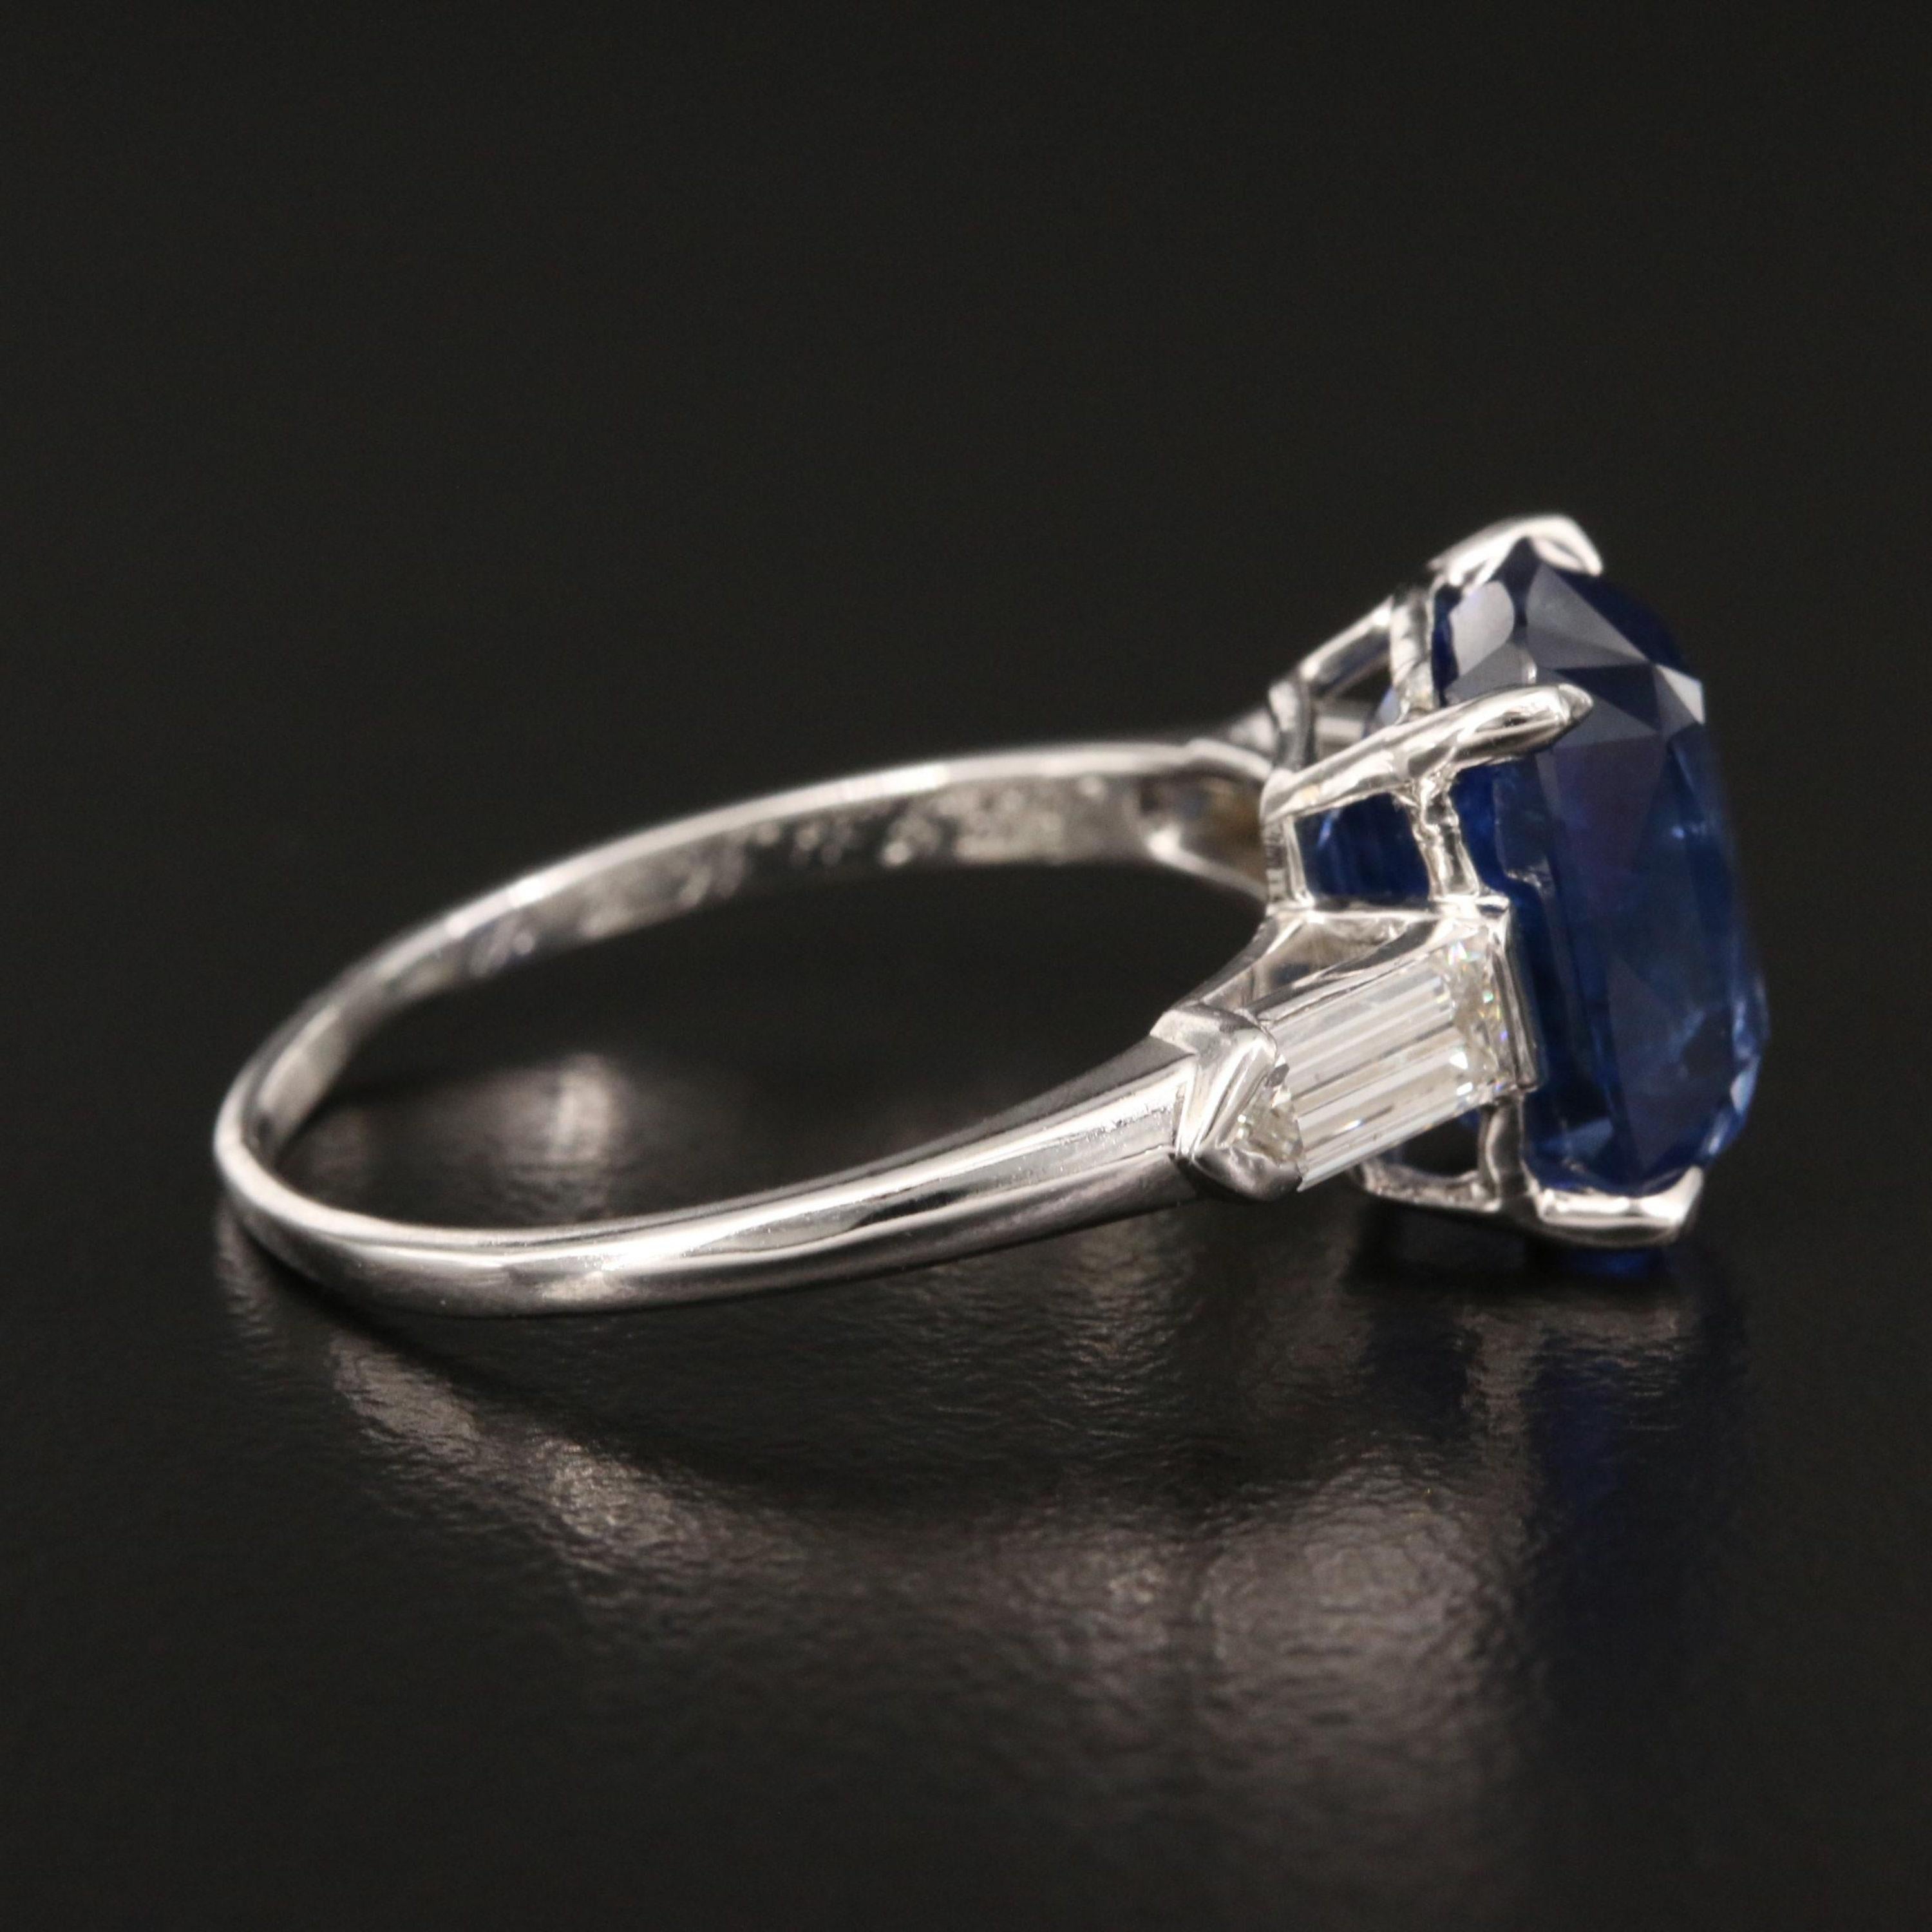 For Sale:  5 Carat Sapphire and Diamond Engagement Ring, White Gold Three Stone Ring 3